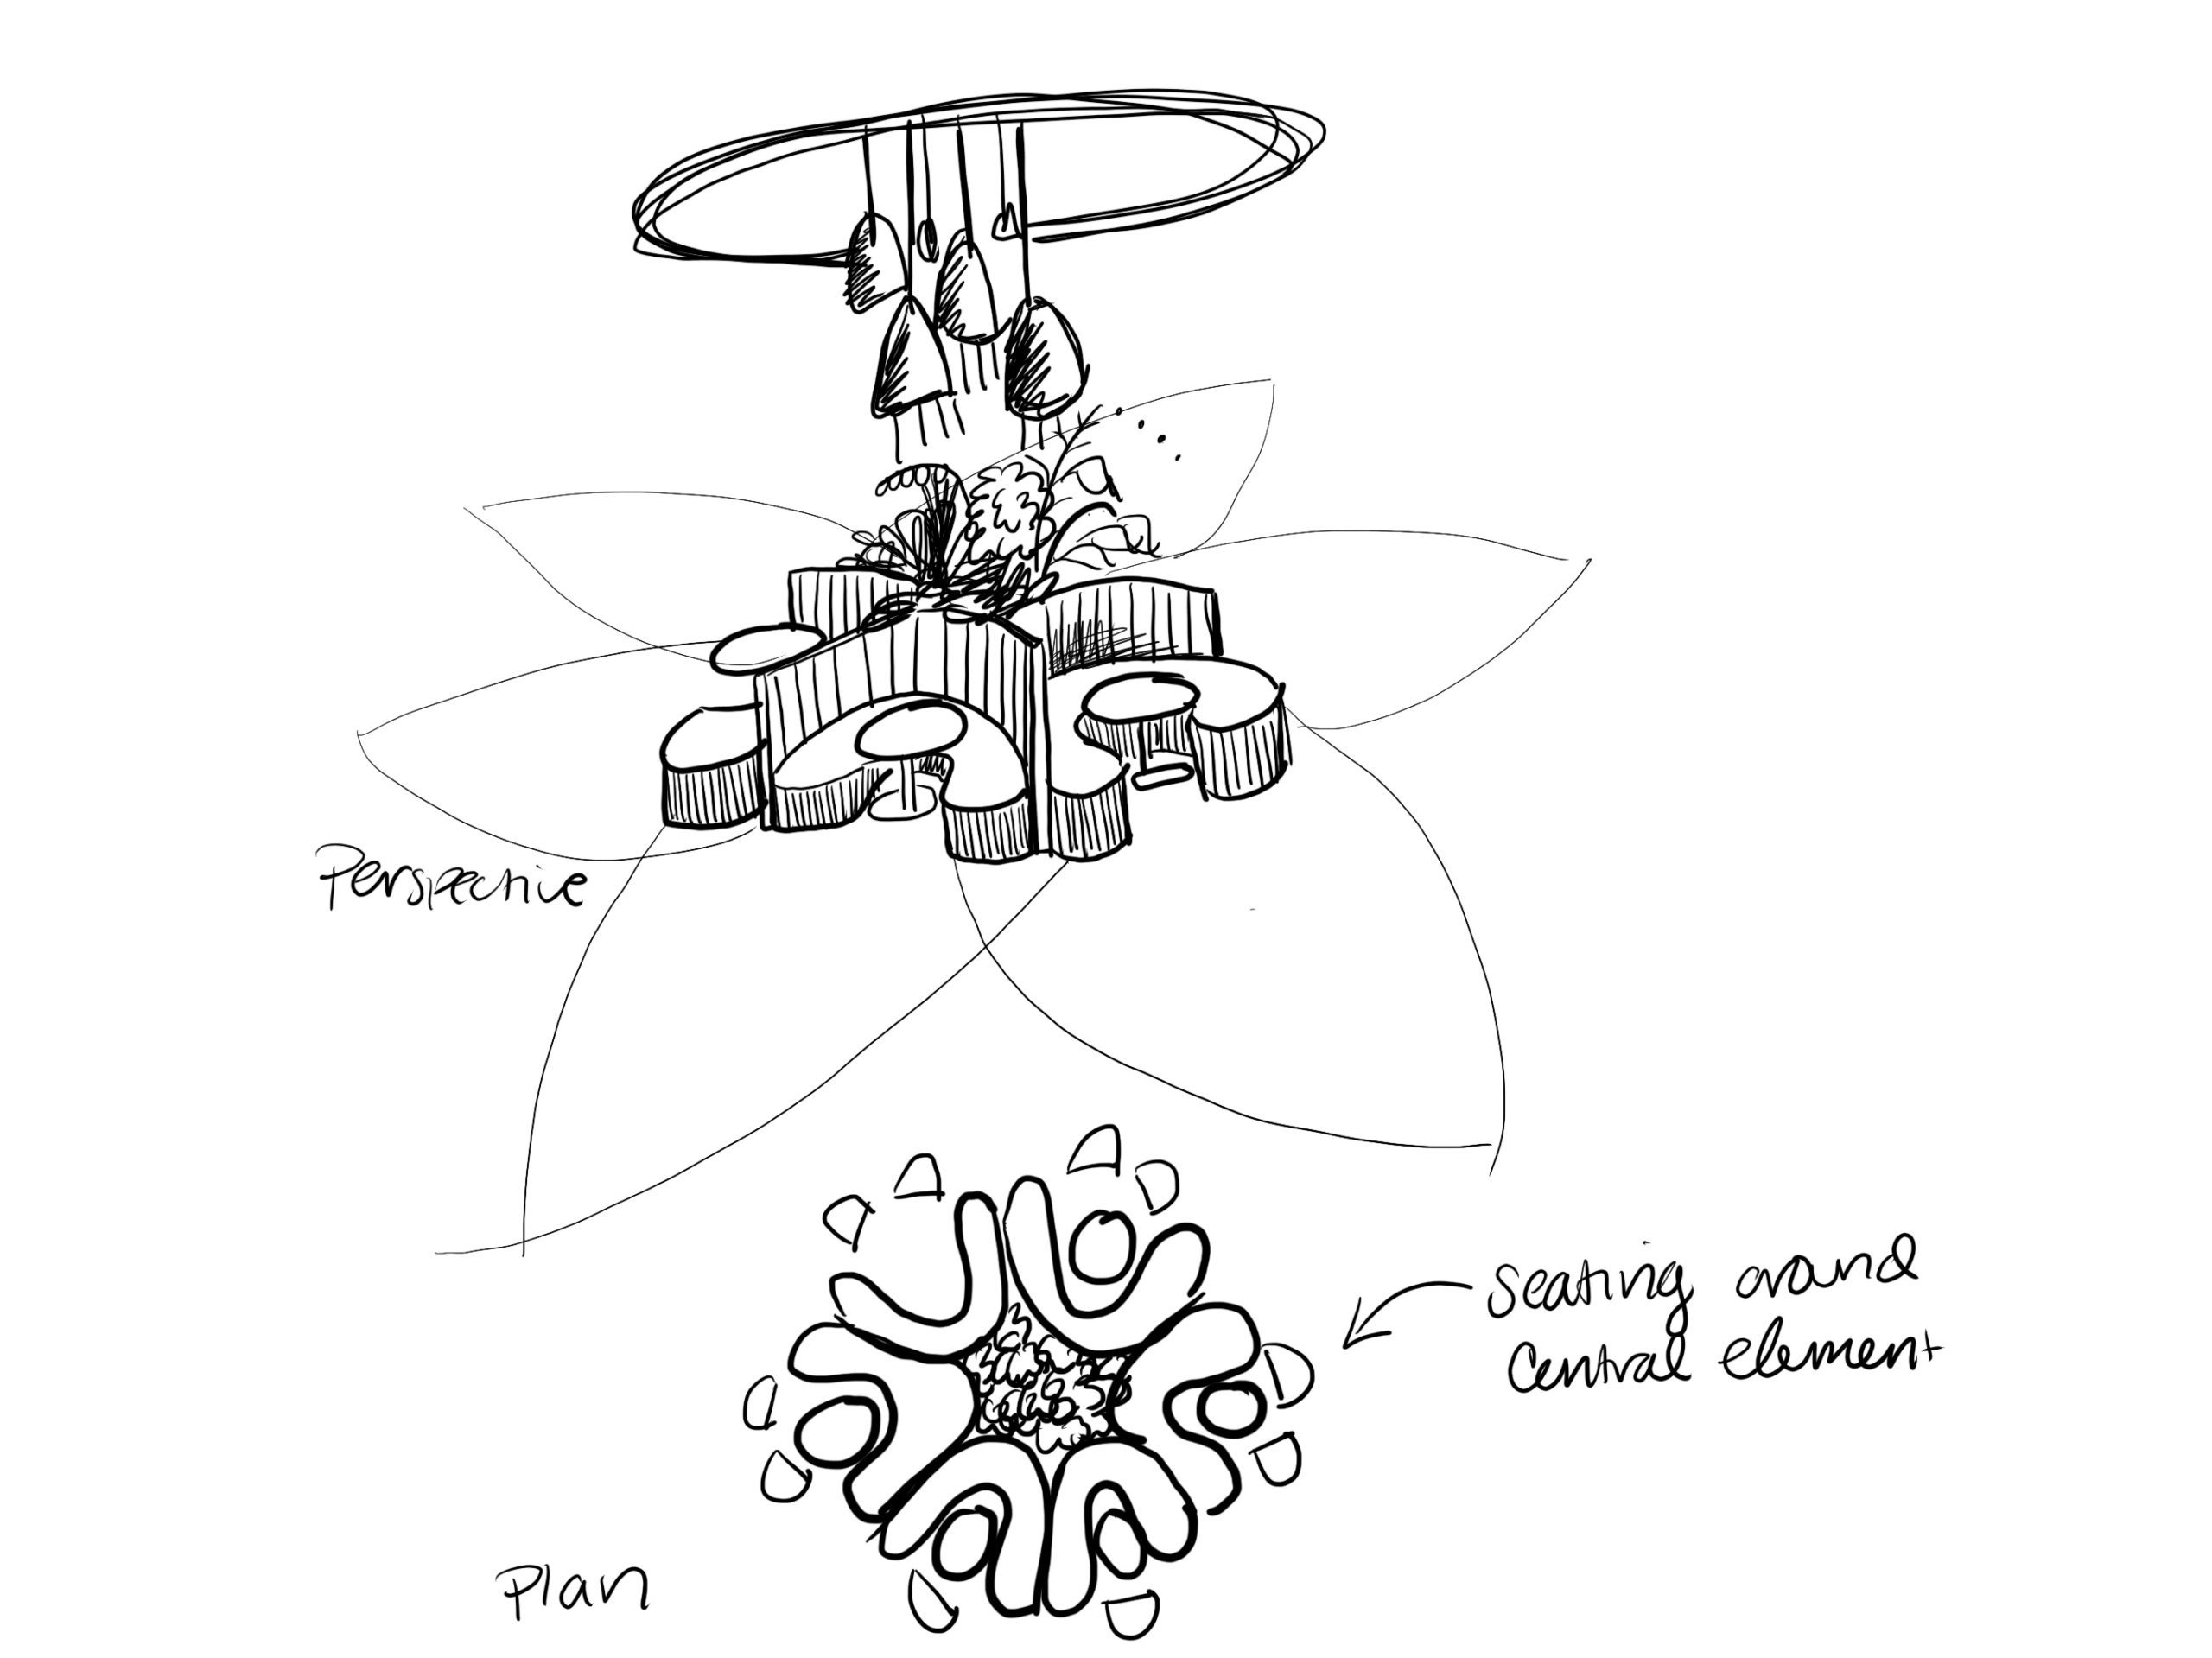 sketch of furniture layout in a radial shape, resembling a flower